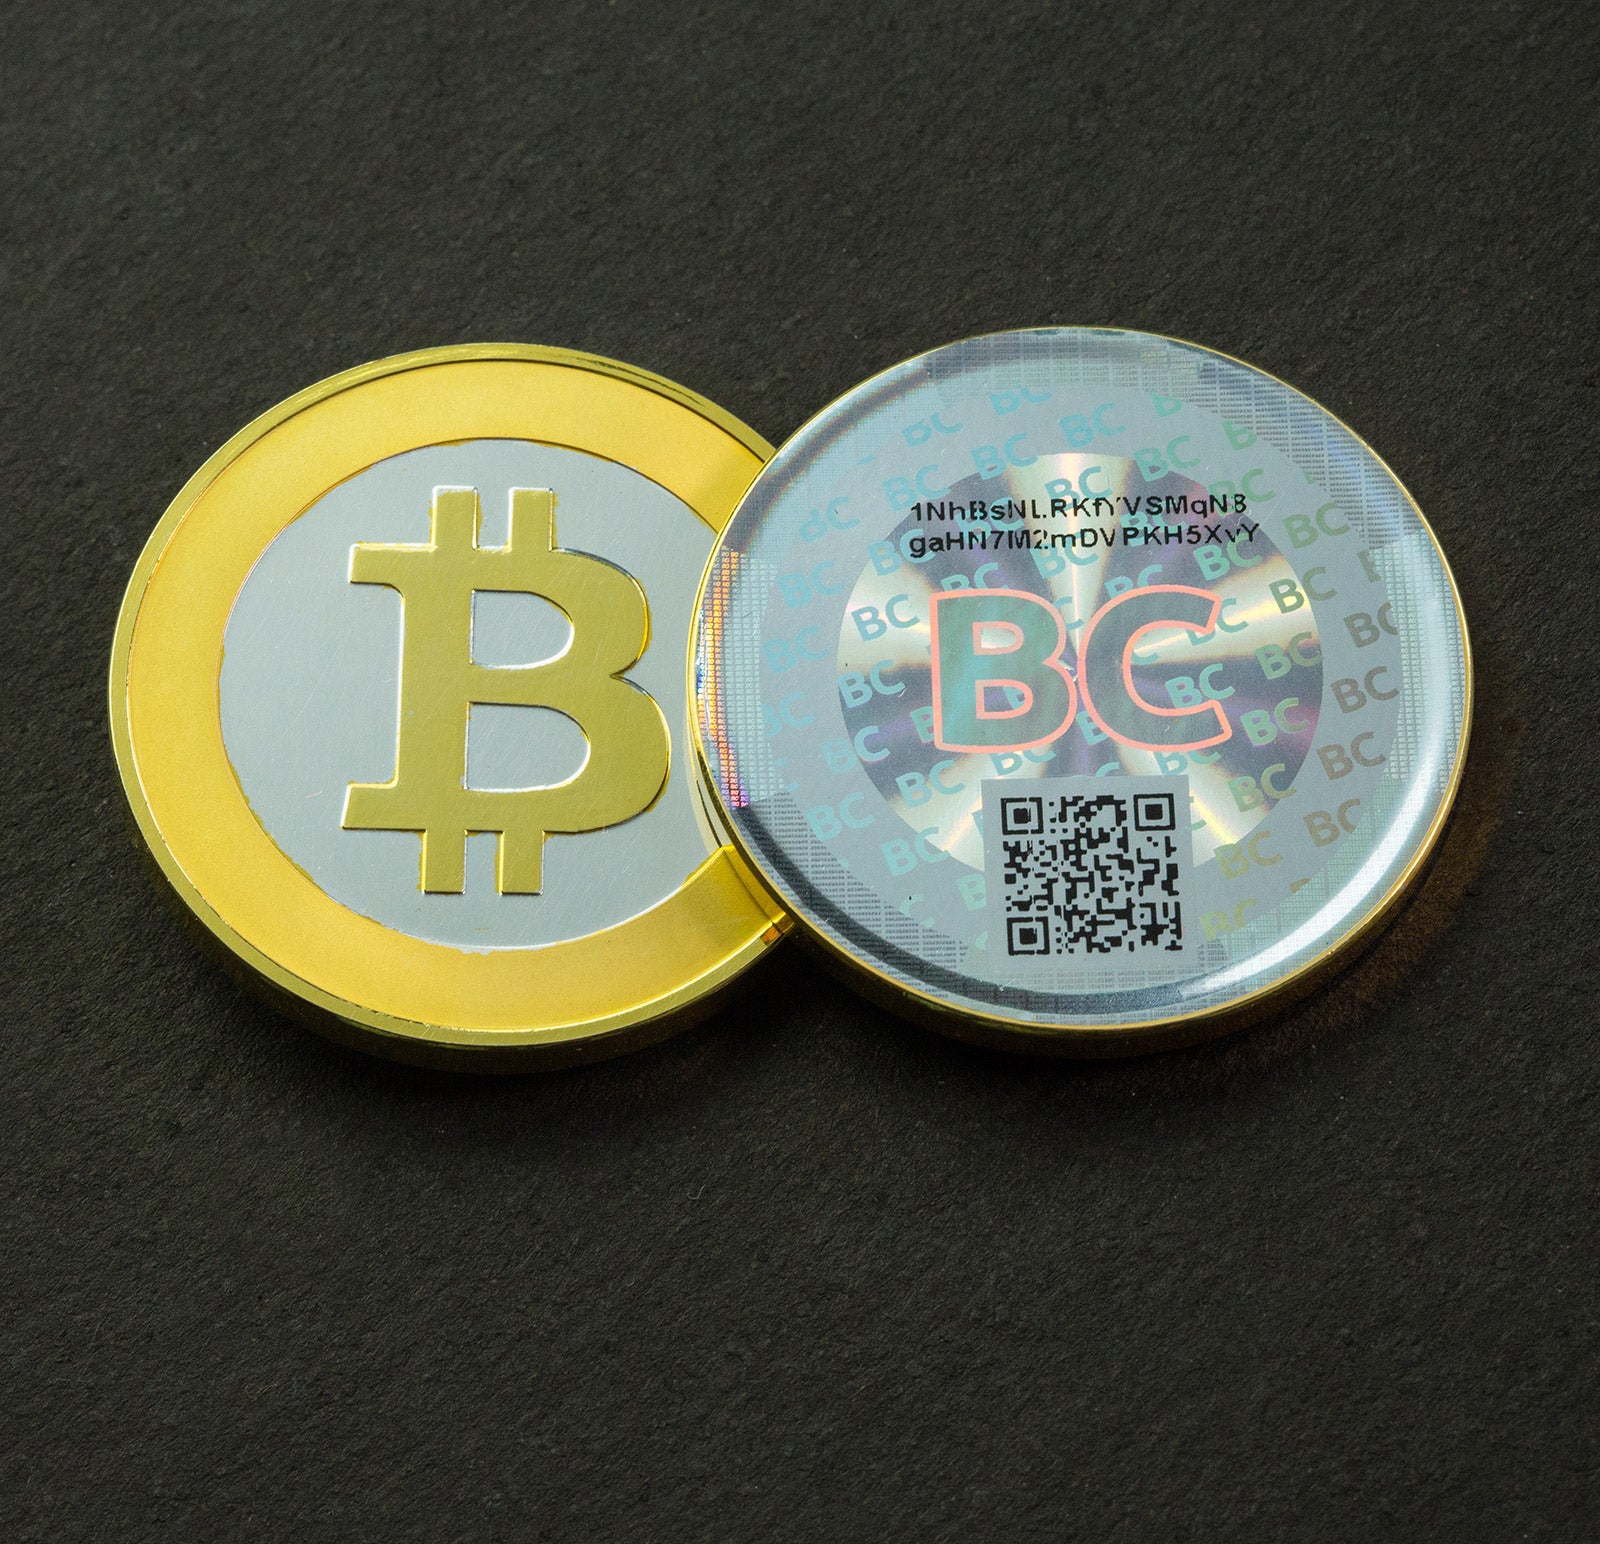 where to buy physical bitcoins